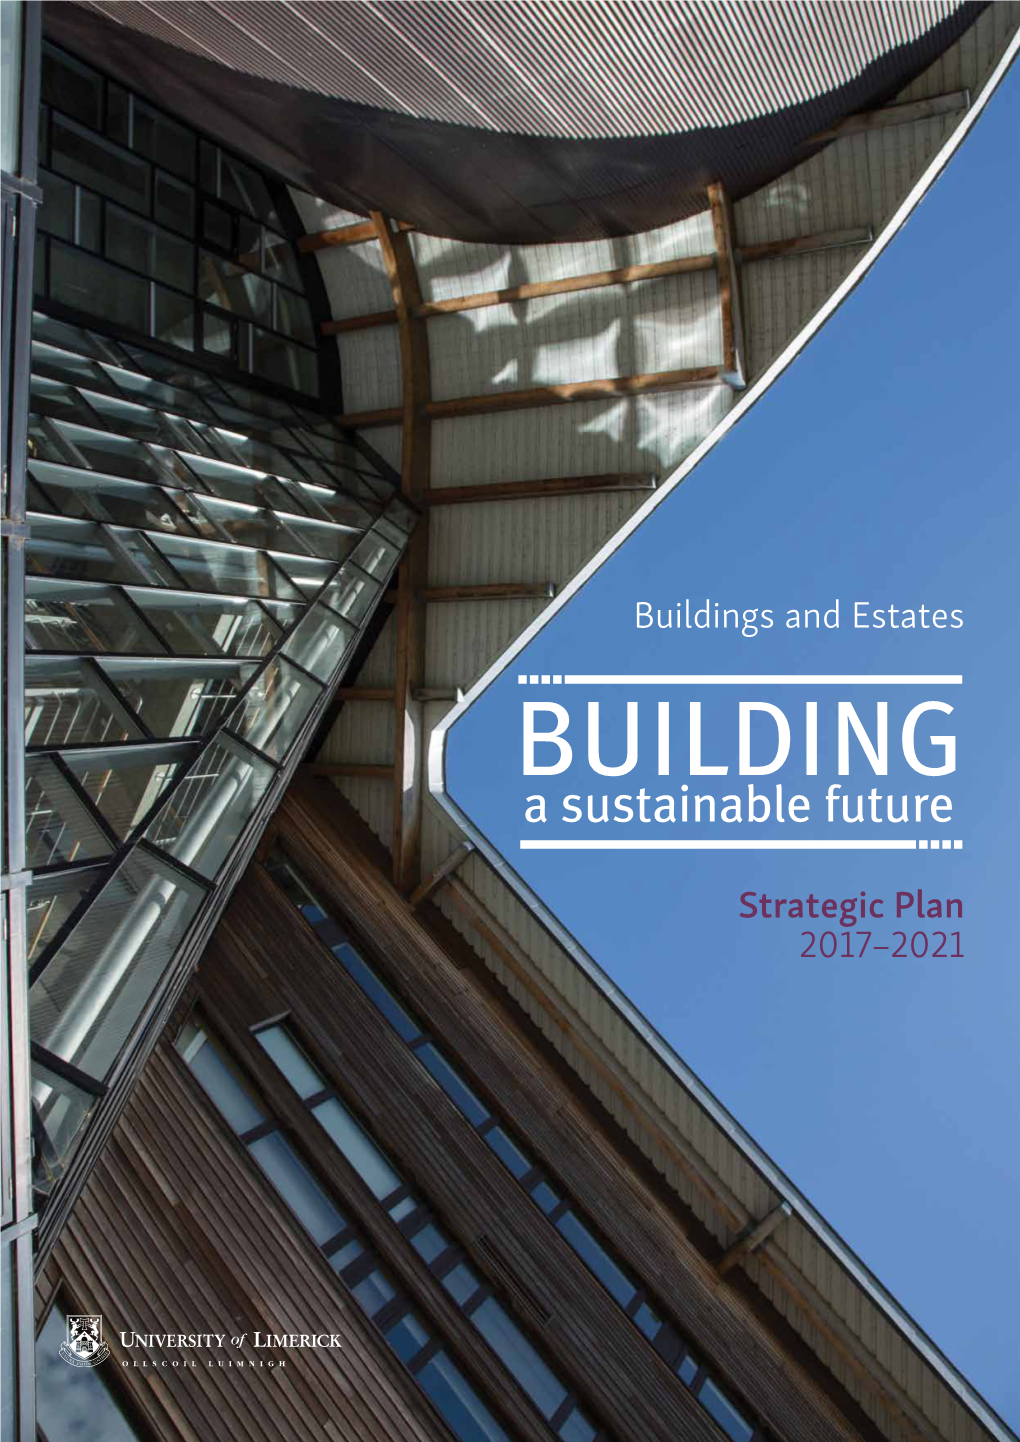 Buildings and Estates BUILDING a Sustainable Future